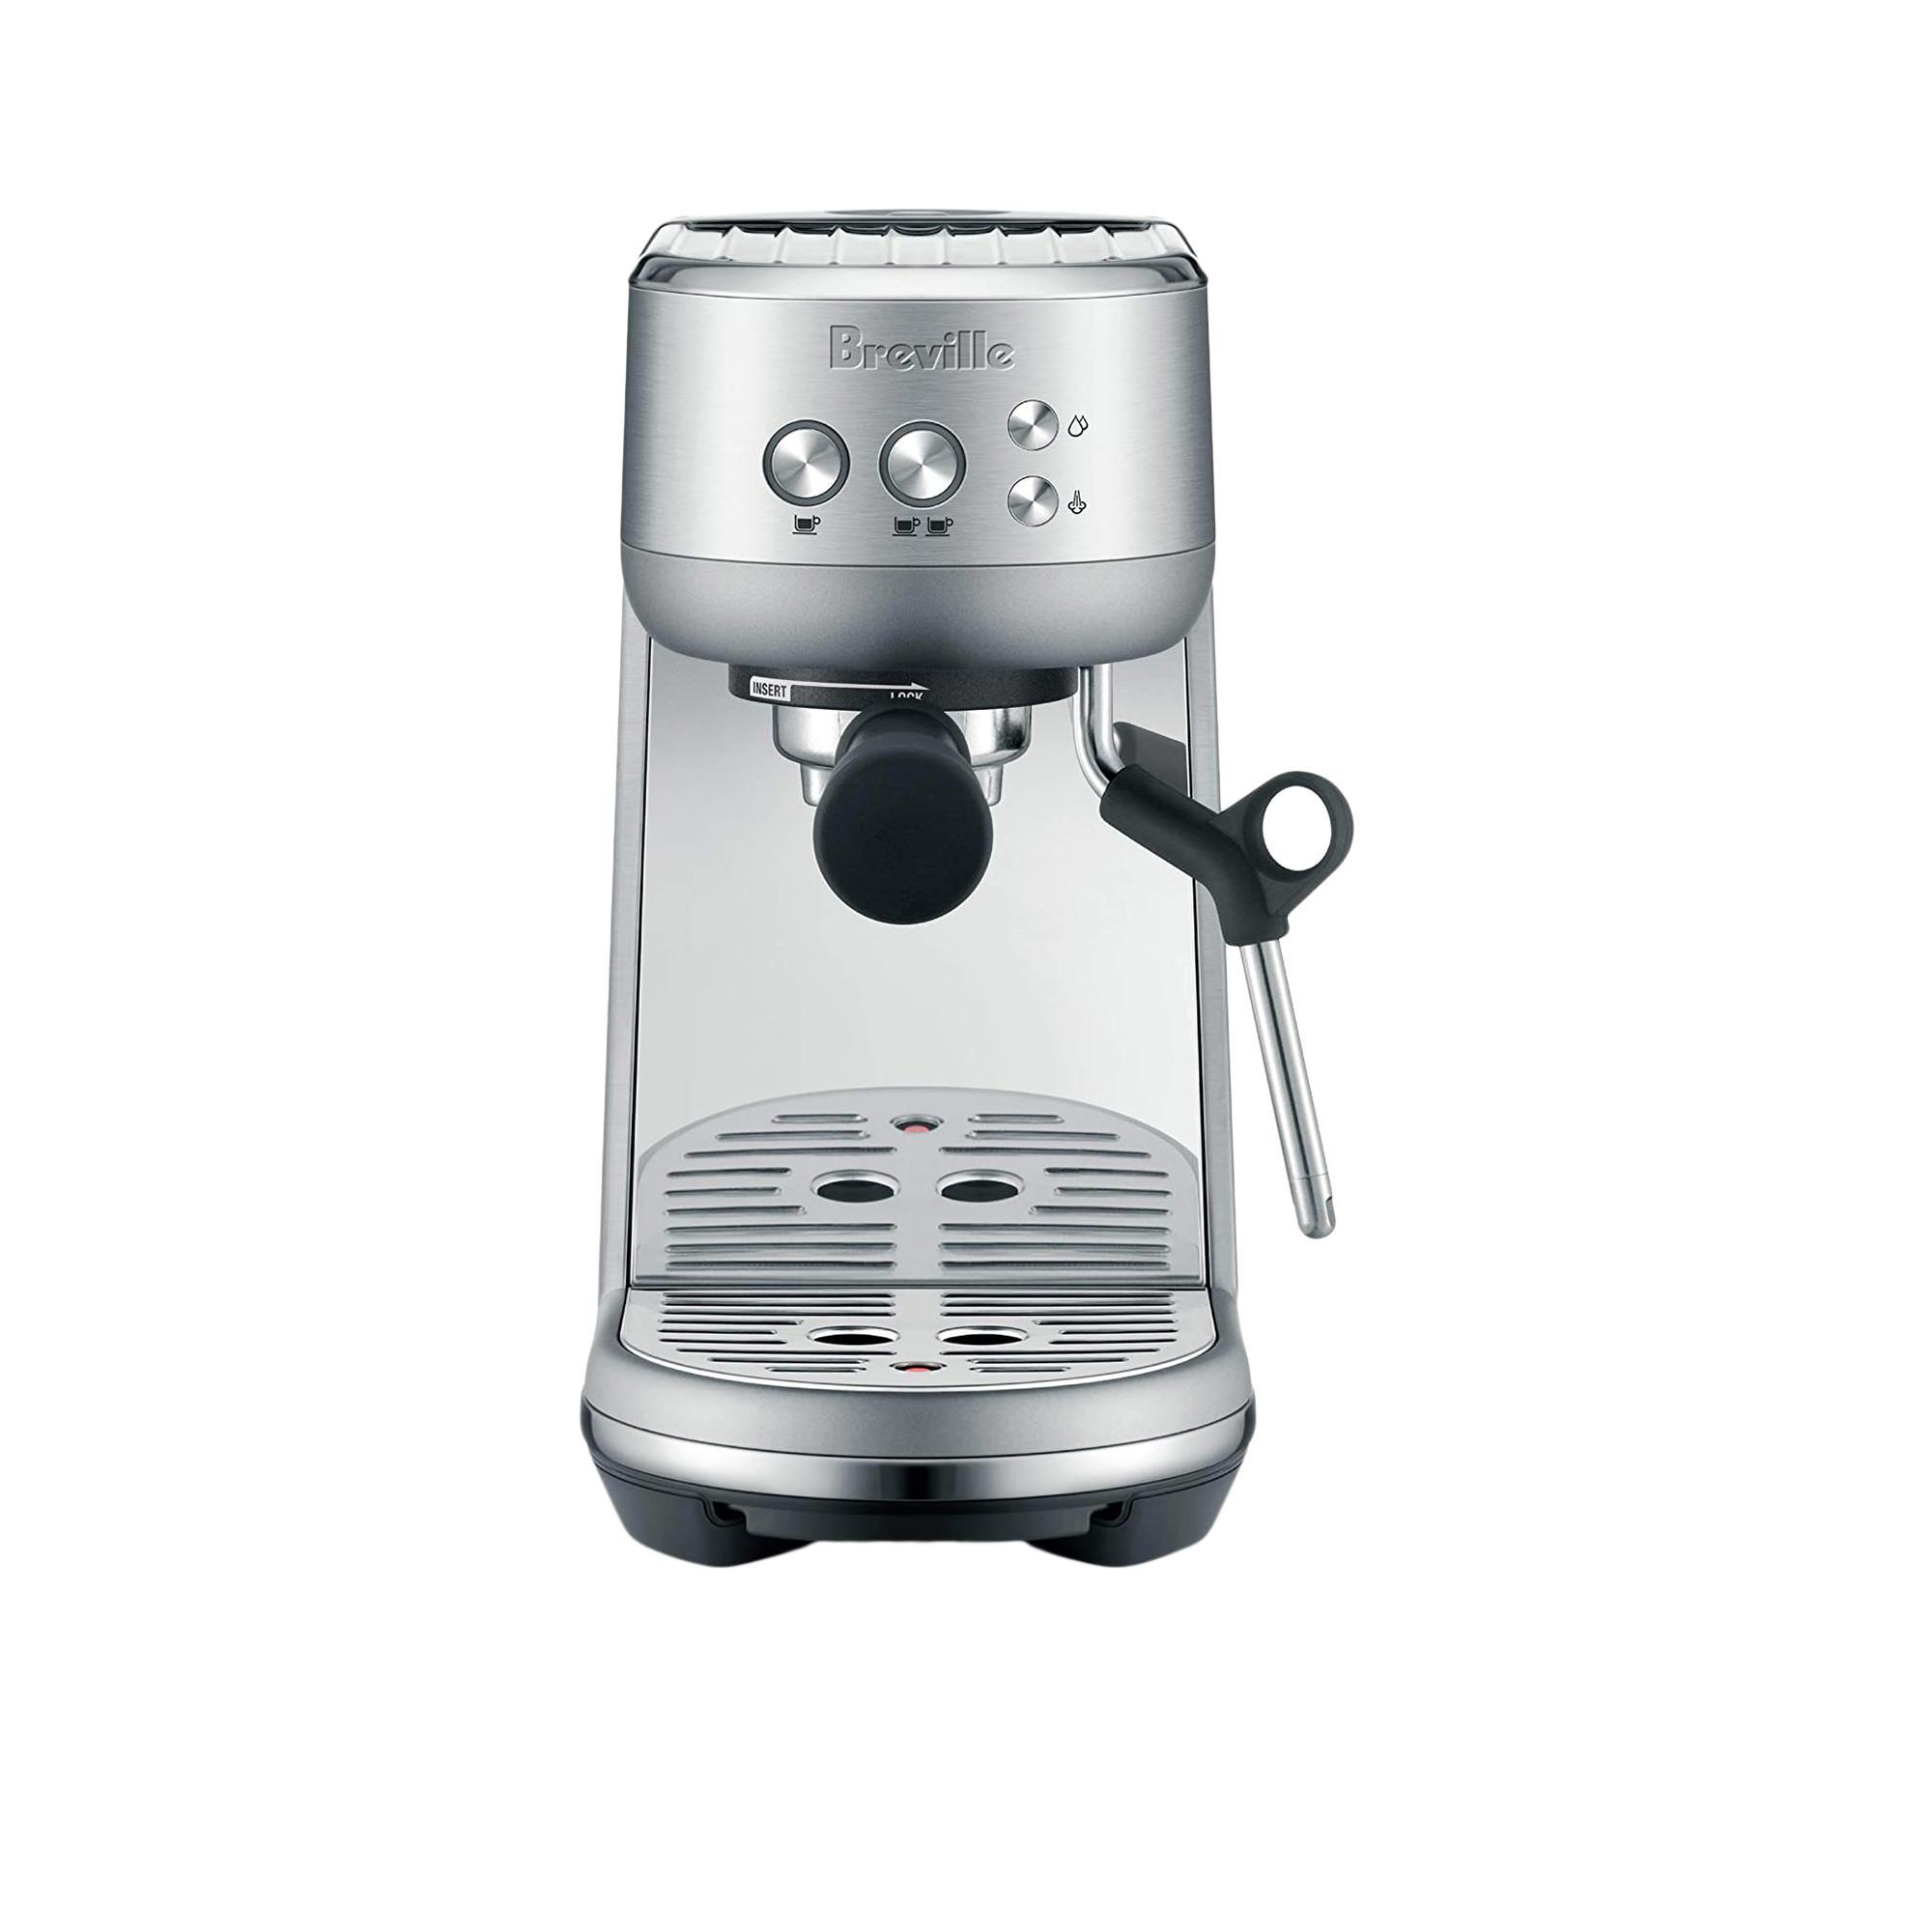 Breville The Bambino Espresso Machine Brushed Stainless Steel Image 1